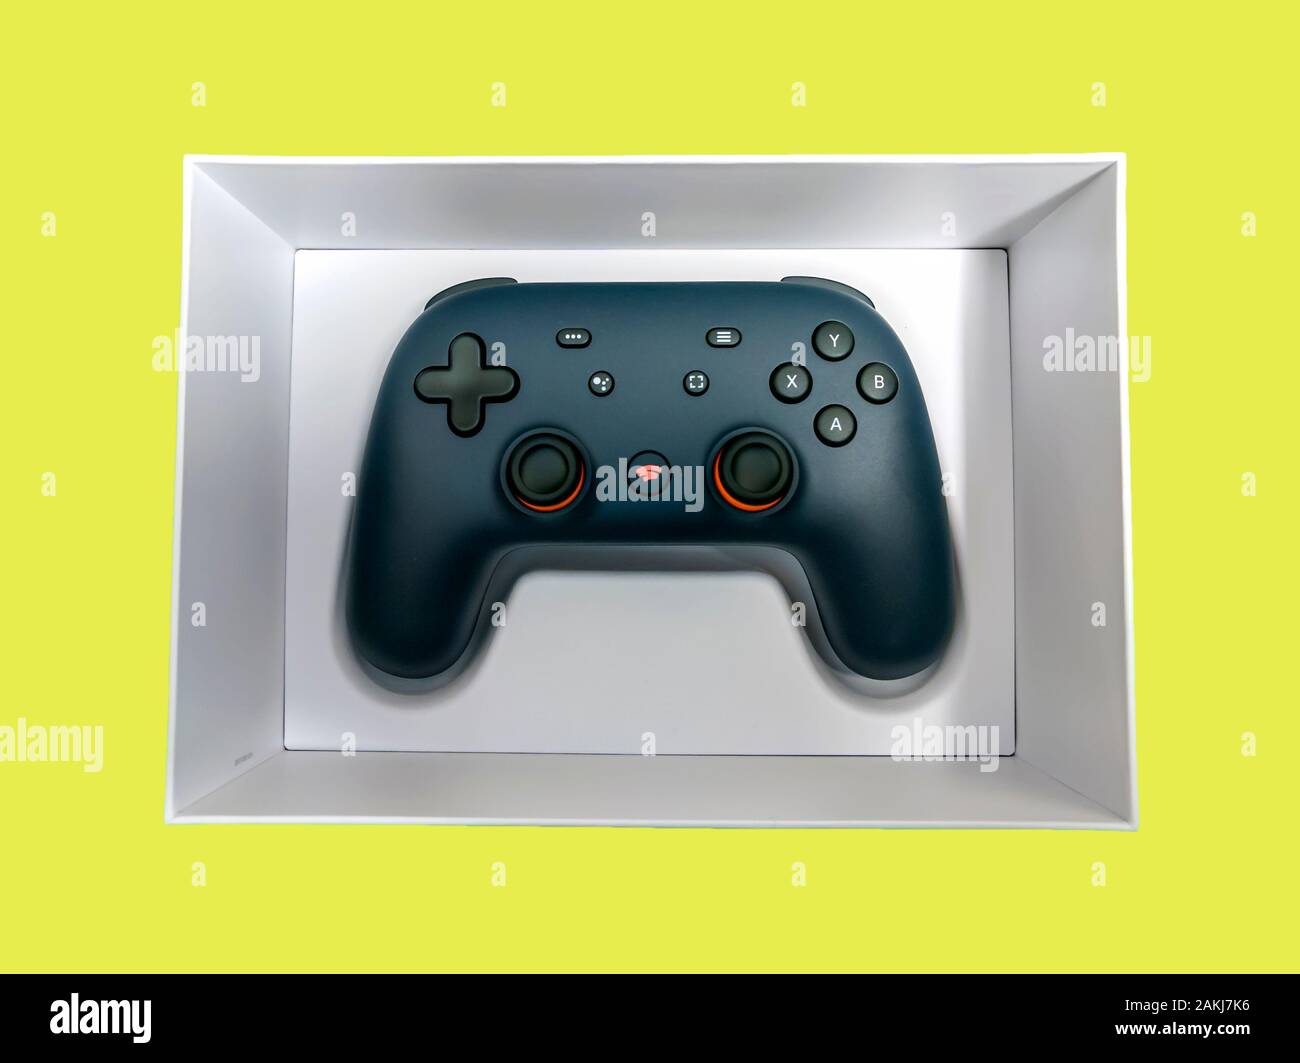 Seattle, WA / USA - circa November 2019: Closeup of a Google Stadia gaming controller inside a white box against a colorful background Stock Photo